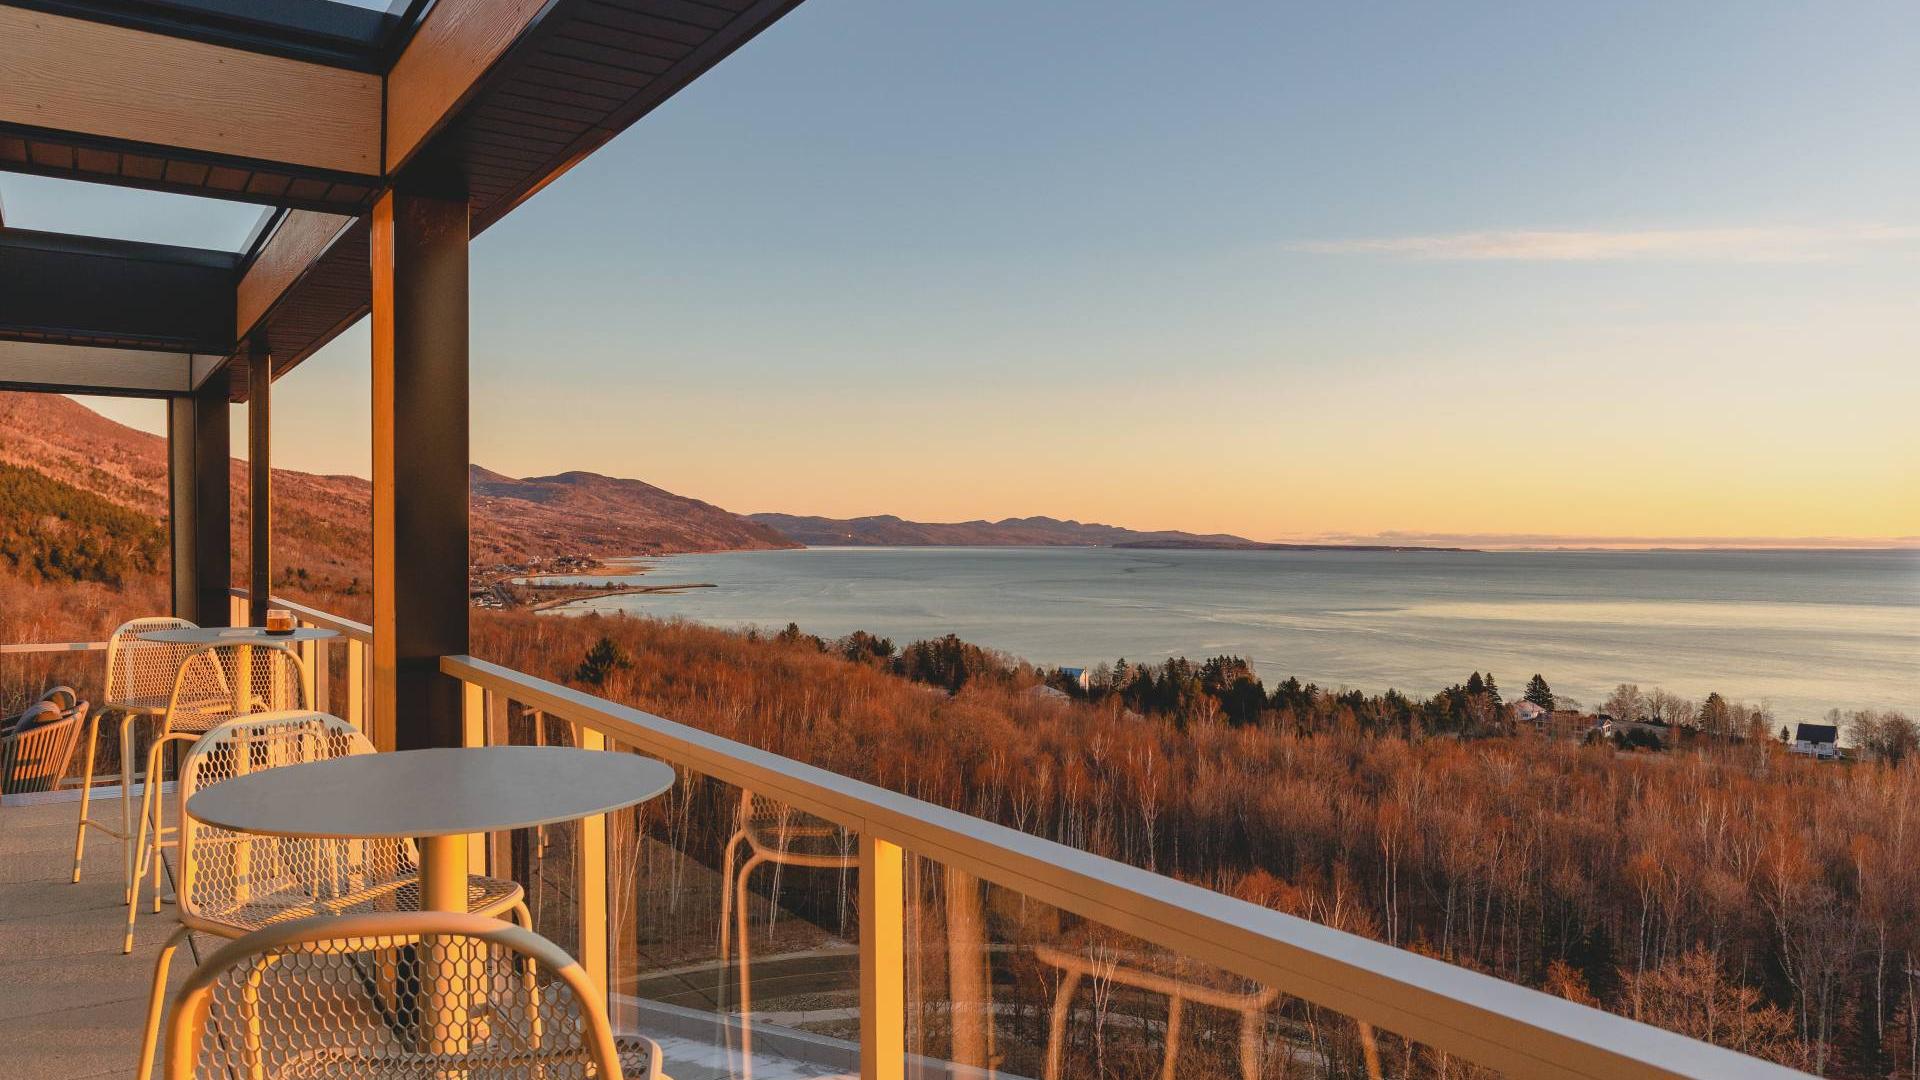 Club Med Charlevoix | The view from a balcony